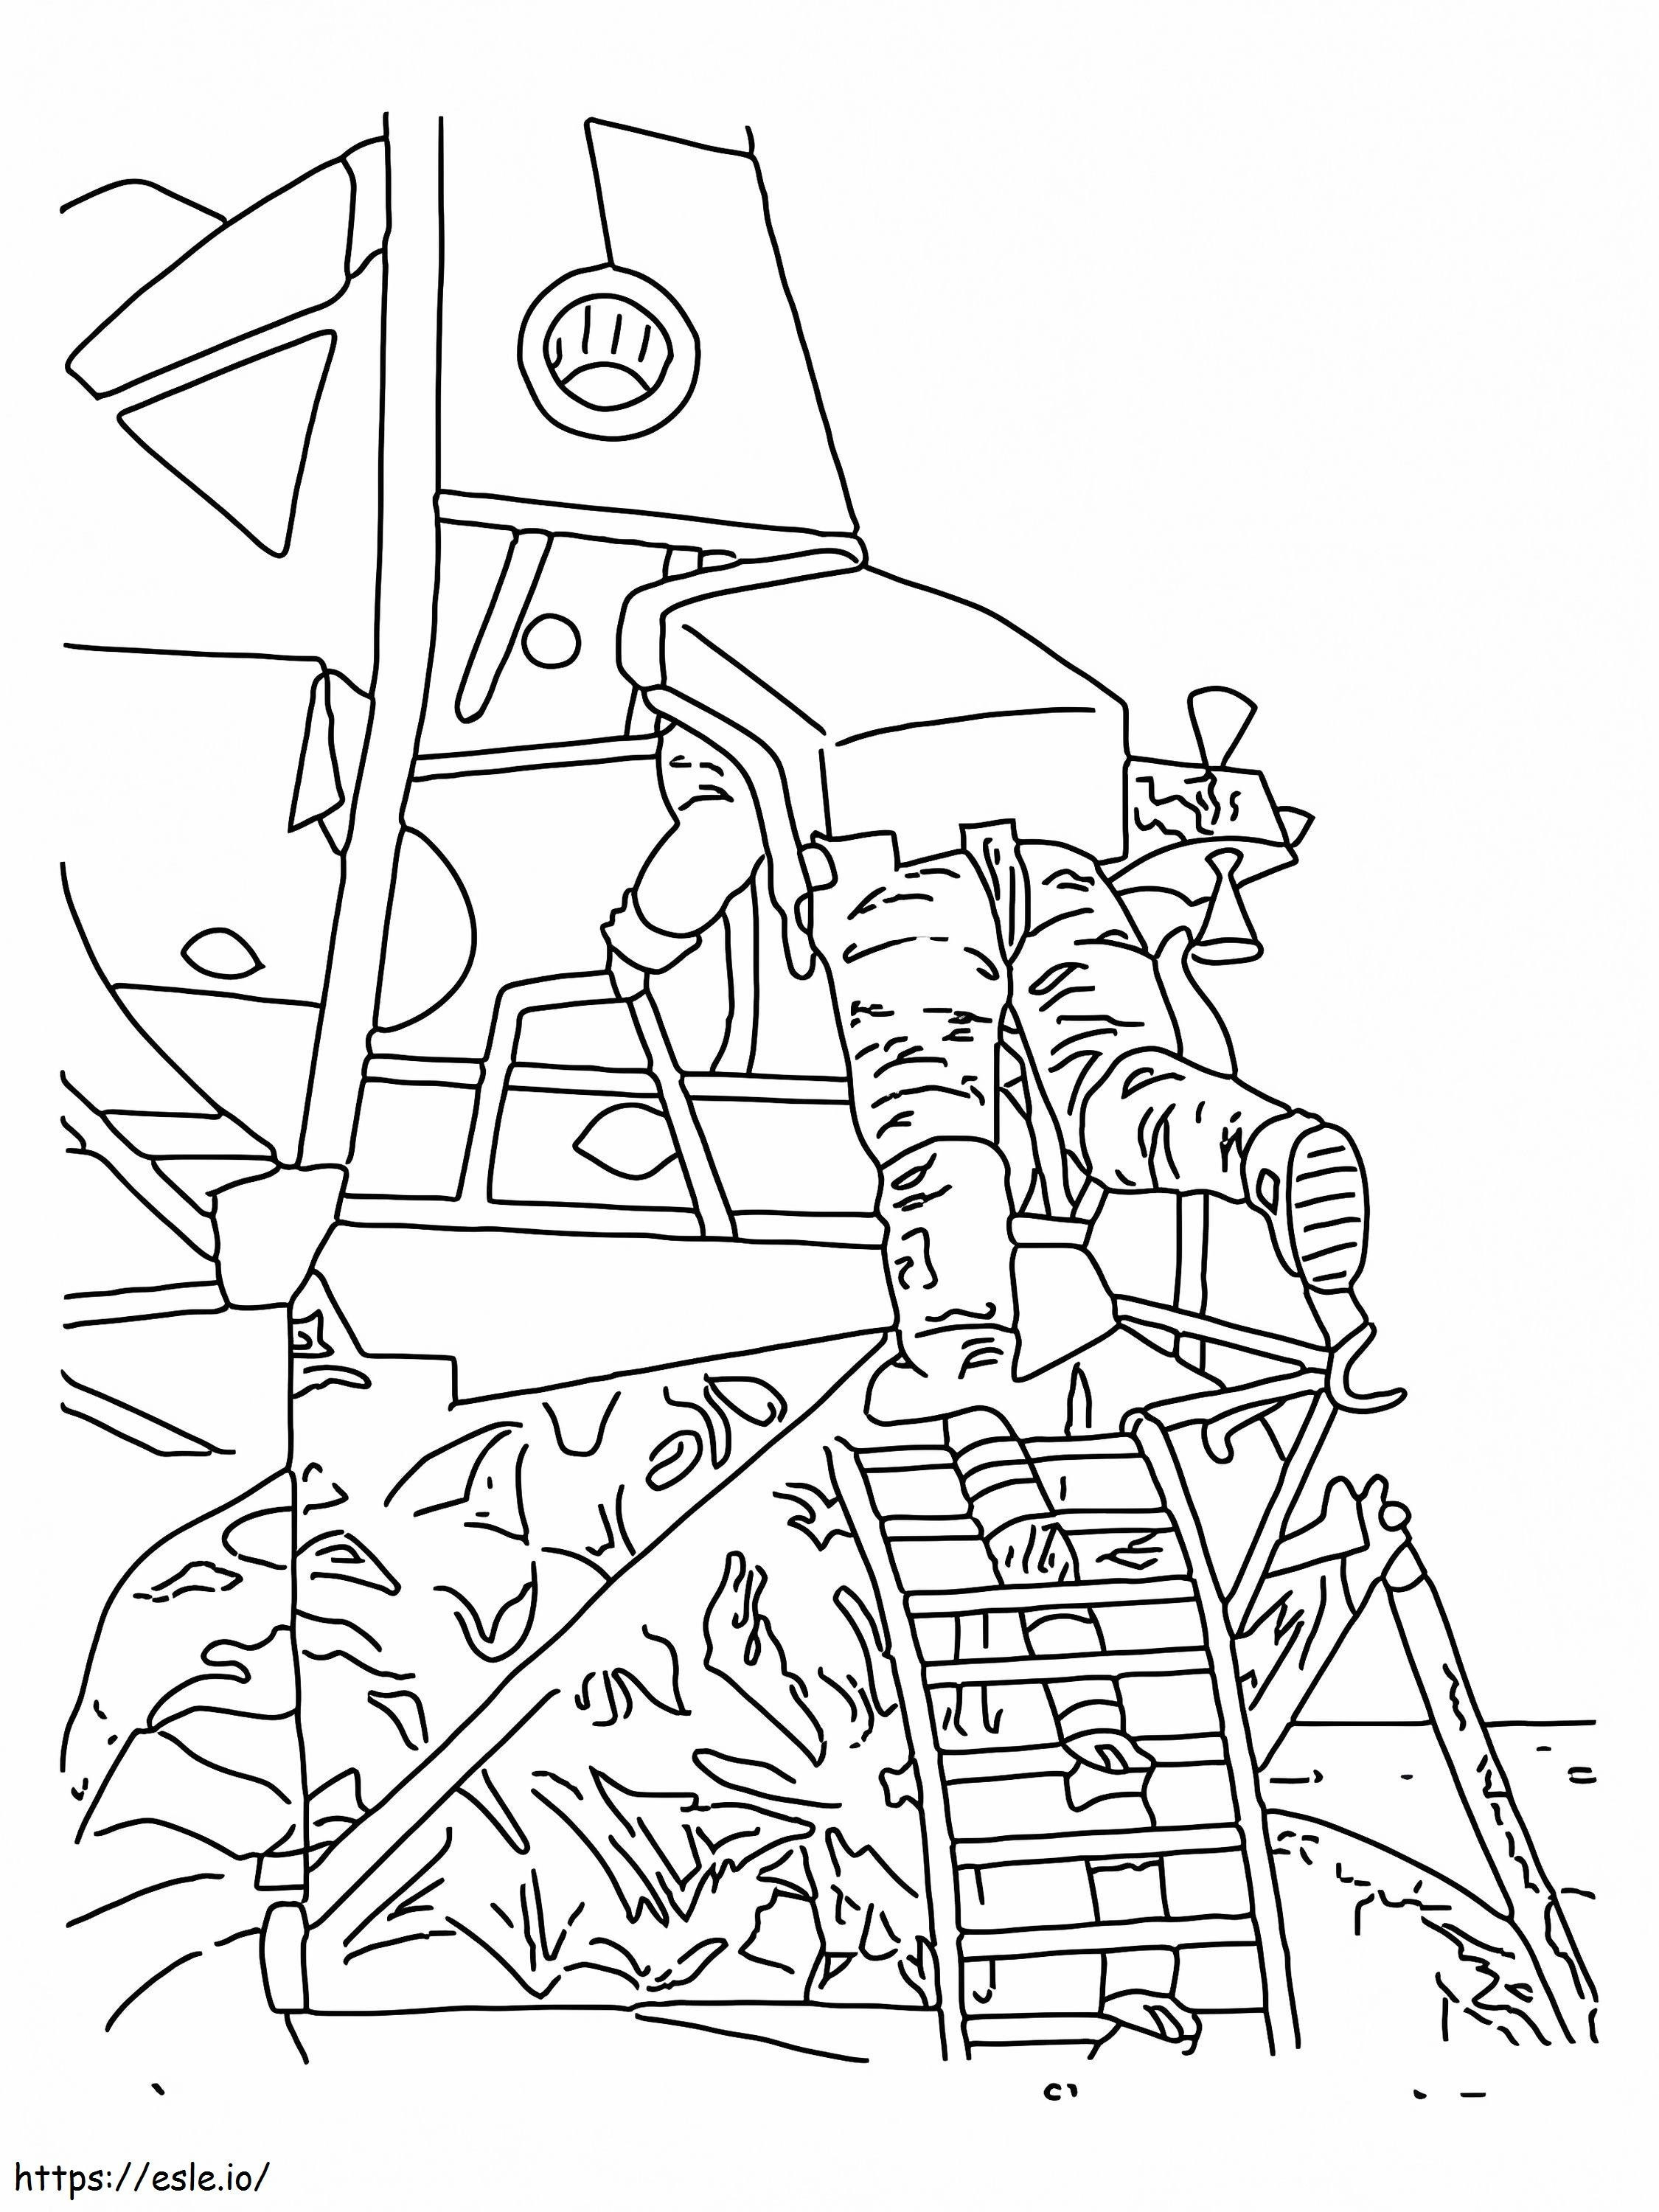 Astronaut In Nasa Luna Module Ladder coloring page